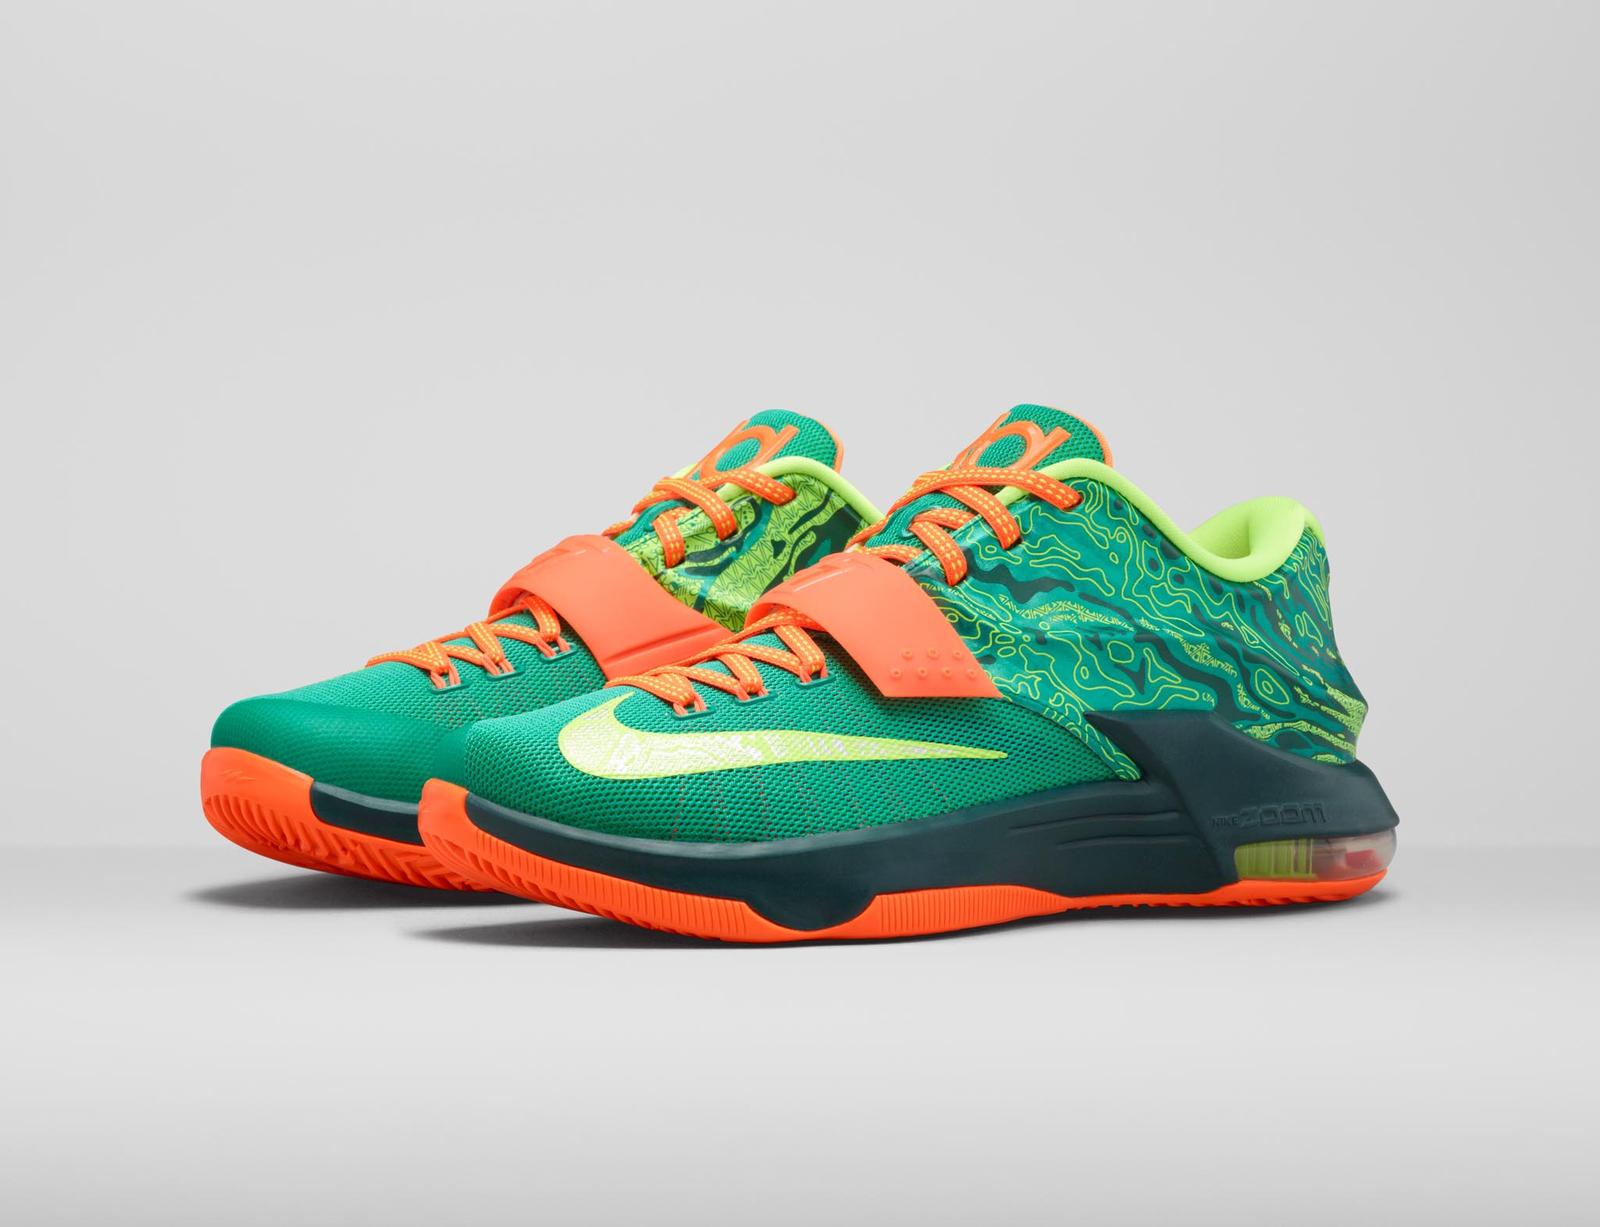 KD7 "Weatherman" Official Images